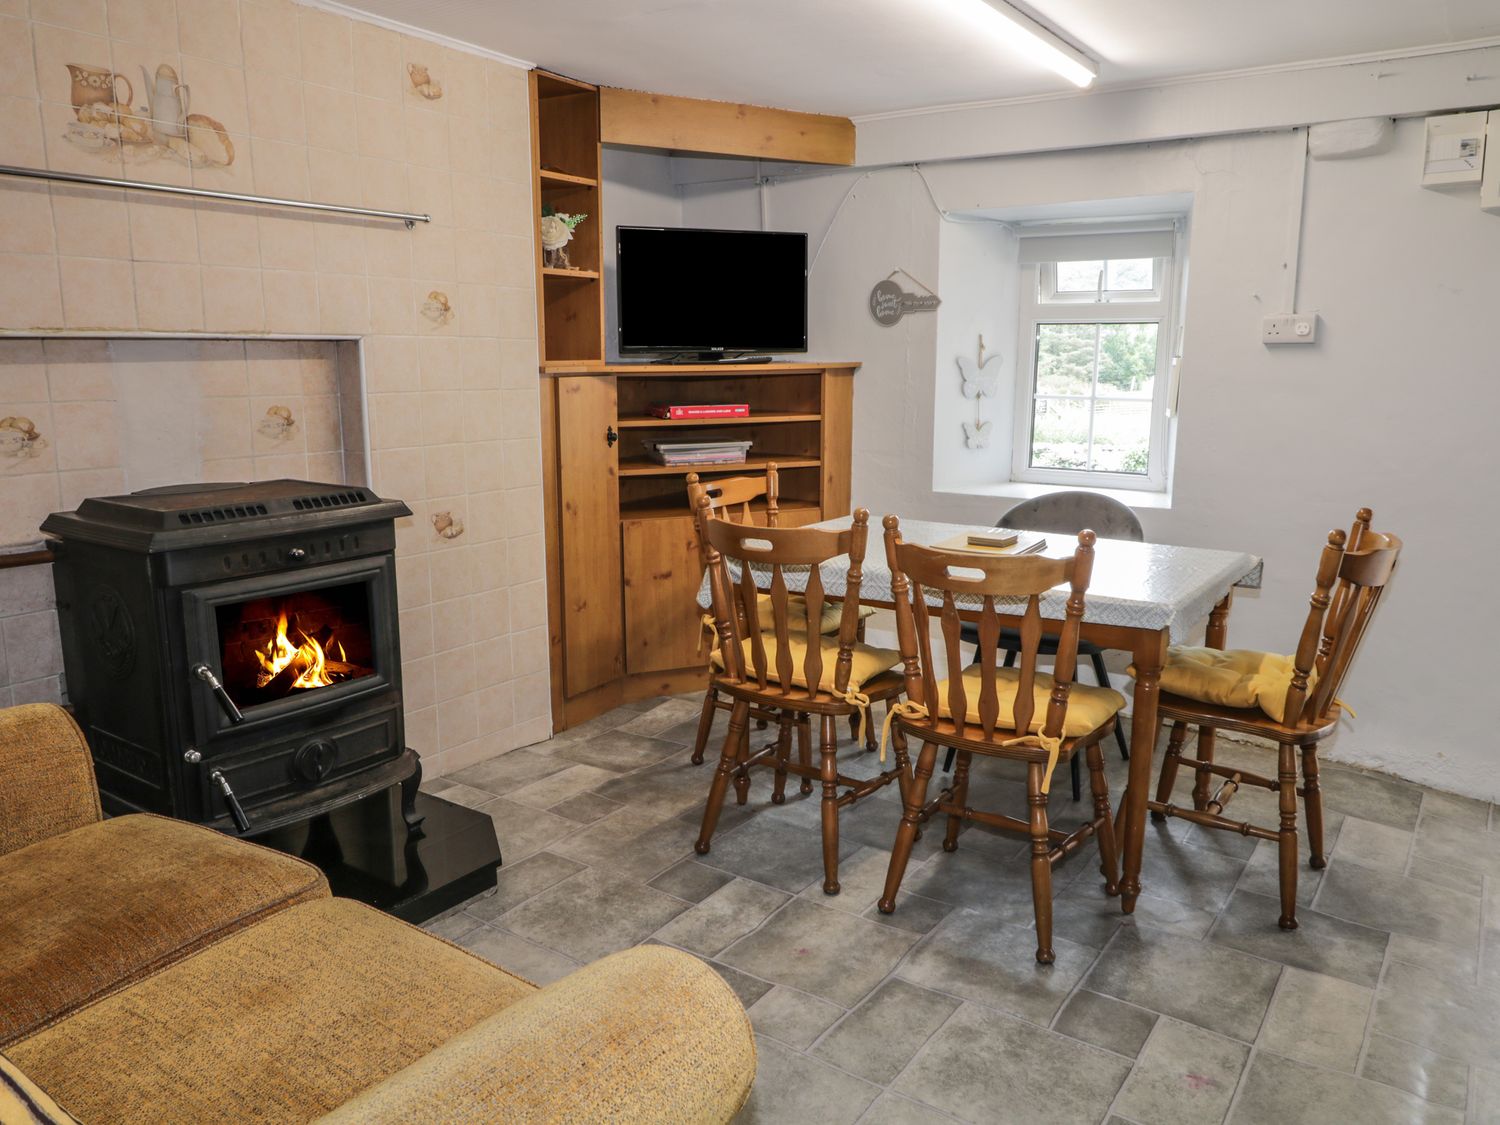 RG's Cottage - County Donegal - 1137998 - photo 1